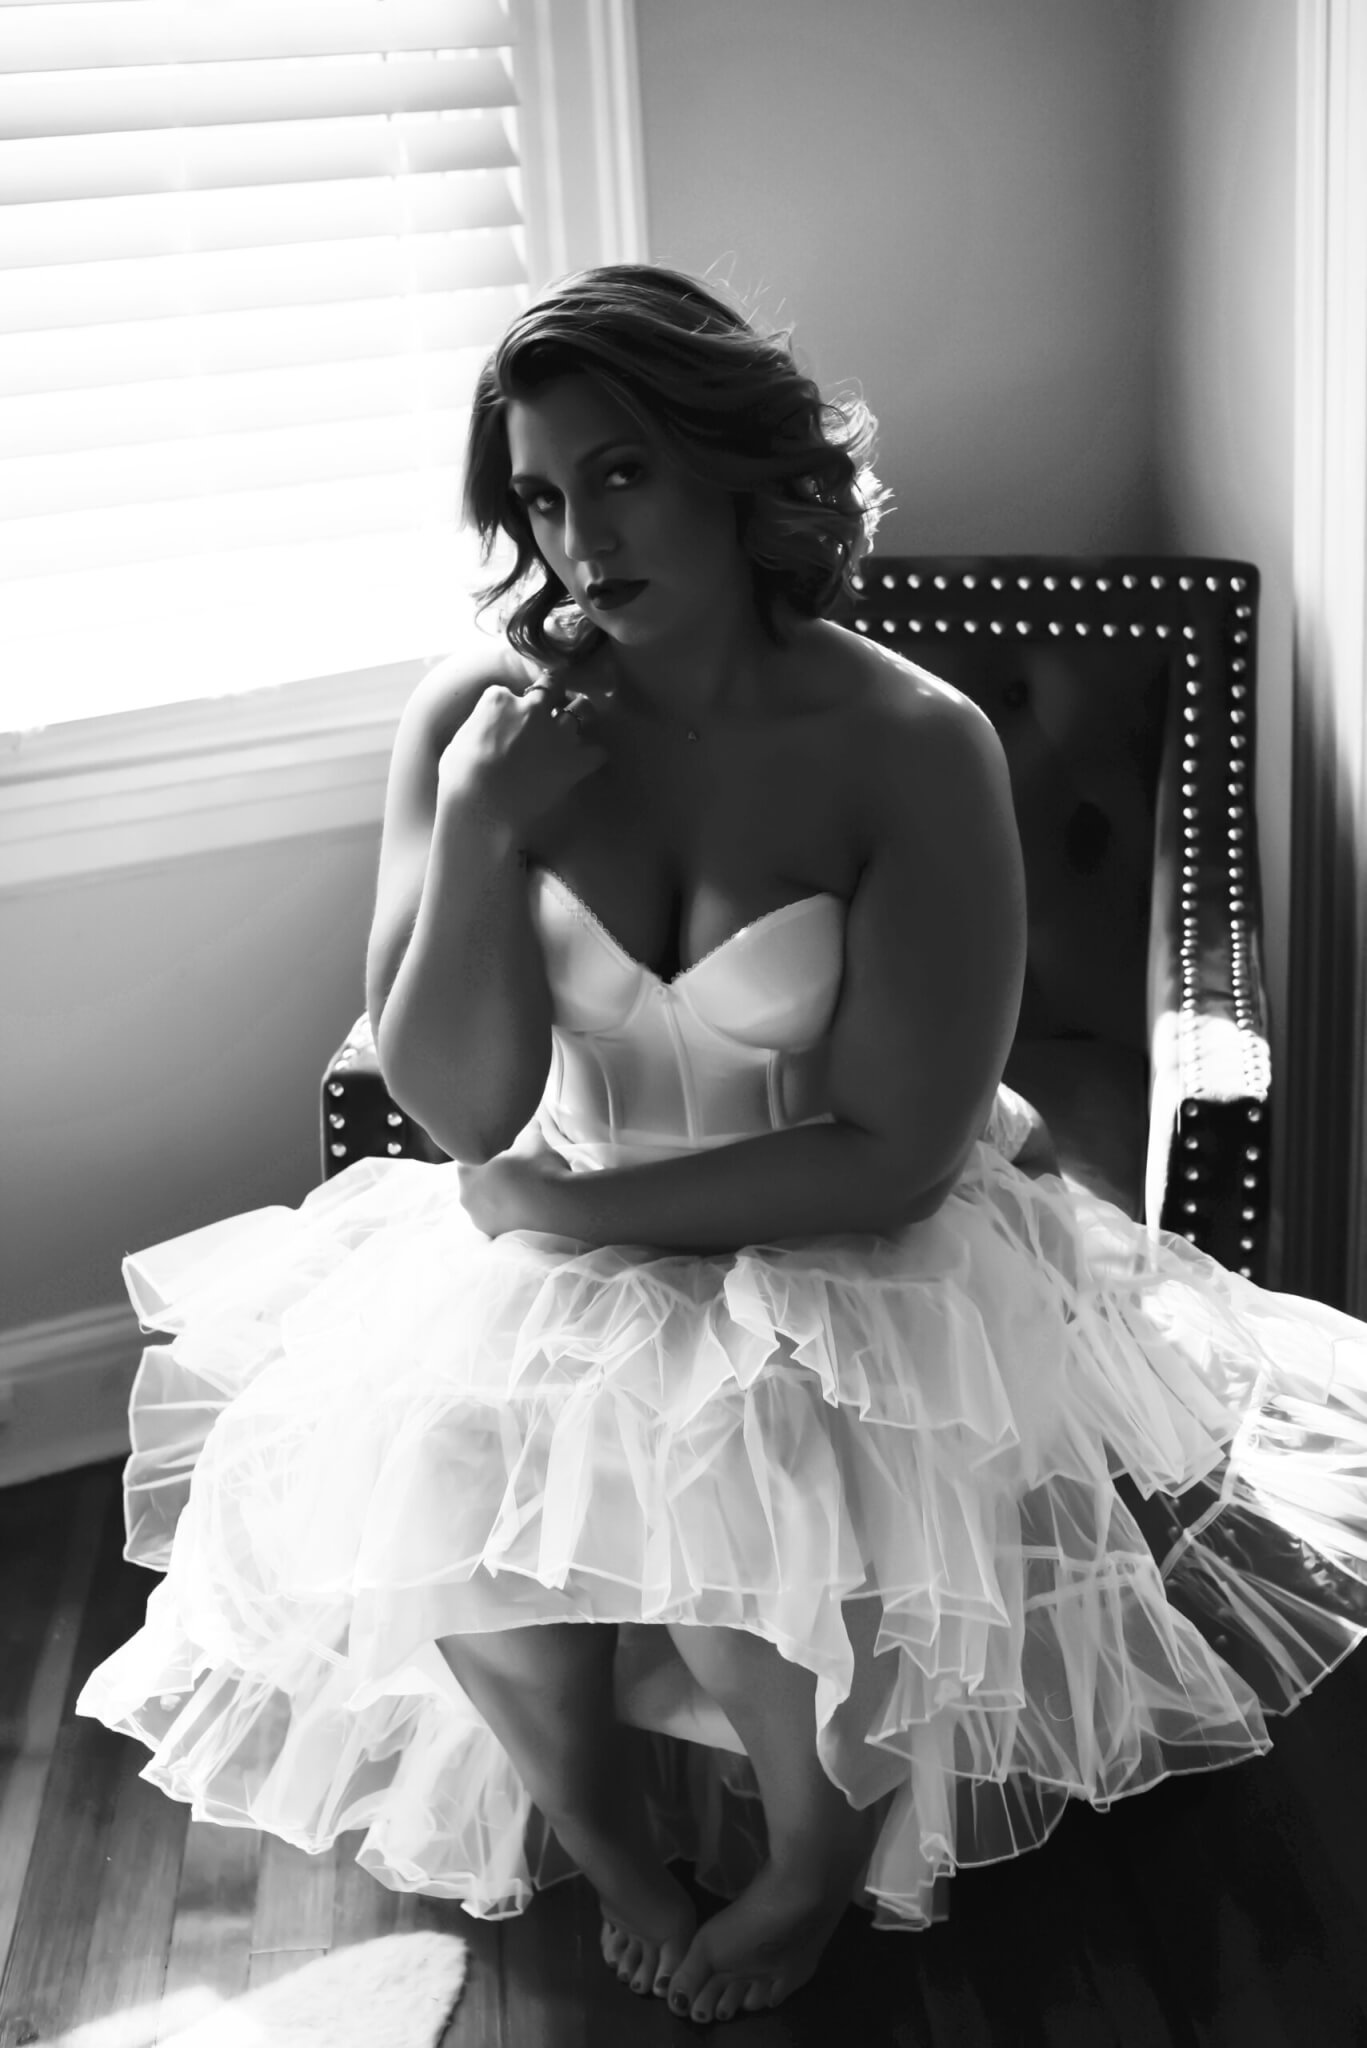 “This is a Great Time for Brides to be in the Studio.” Be a Model for Alli Murphy Photography’s Incredible Bridal Boudoir Experience